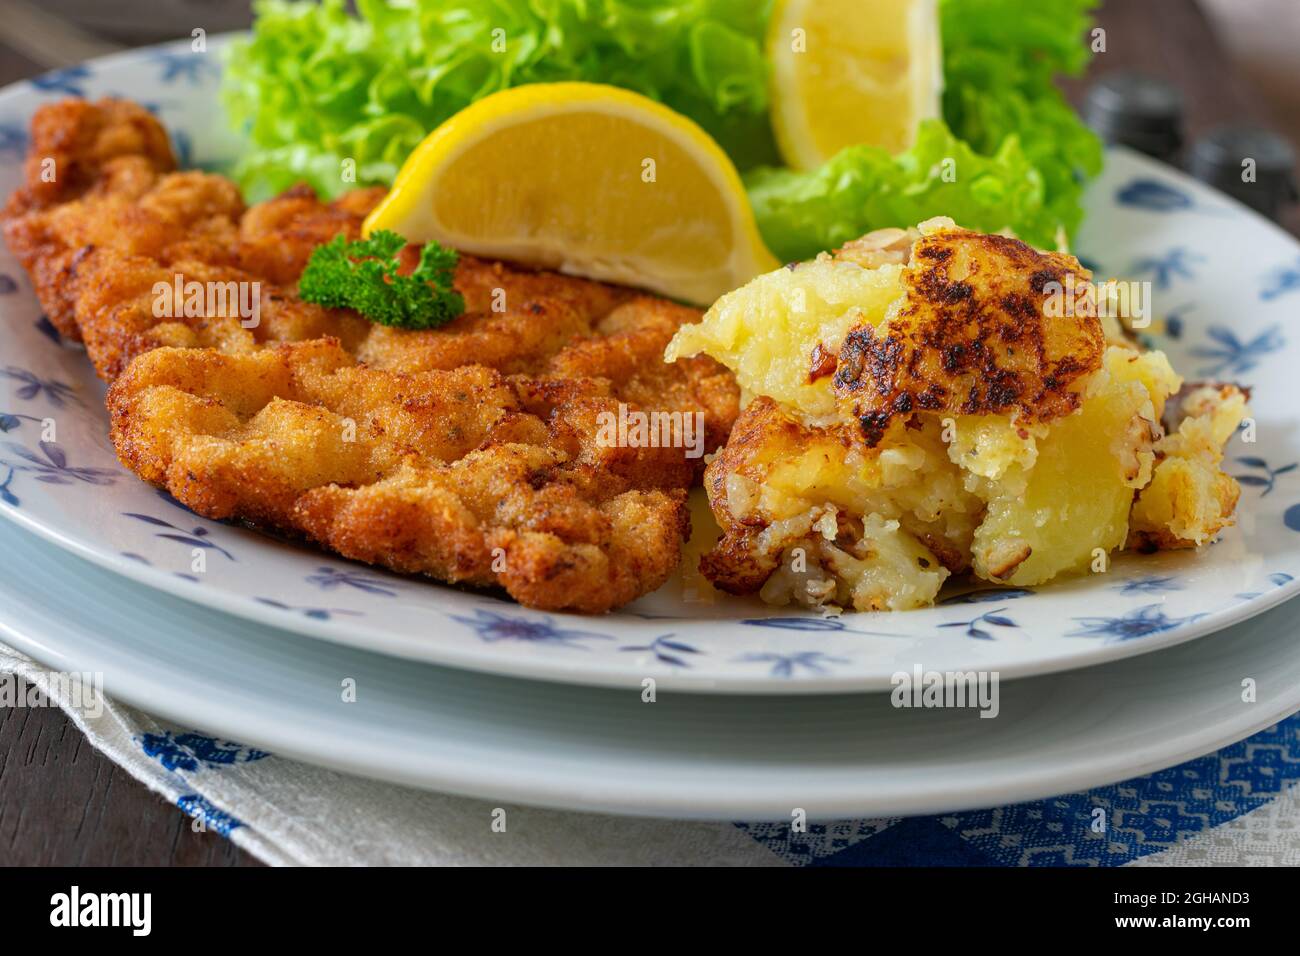 Rustic meat dish with austrian vienna schnitzel and potato schmarrn on a plate Stock Photo